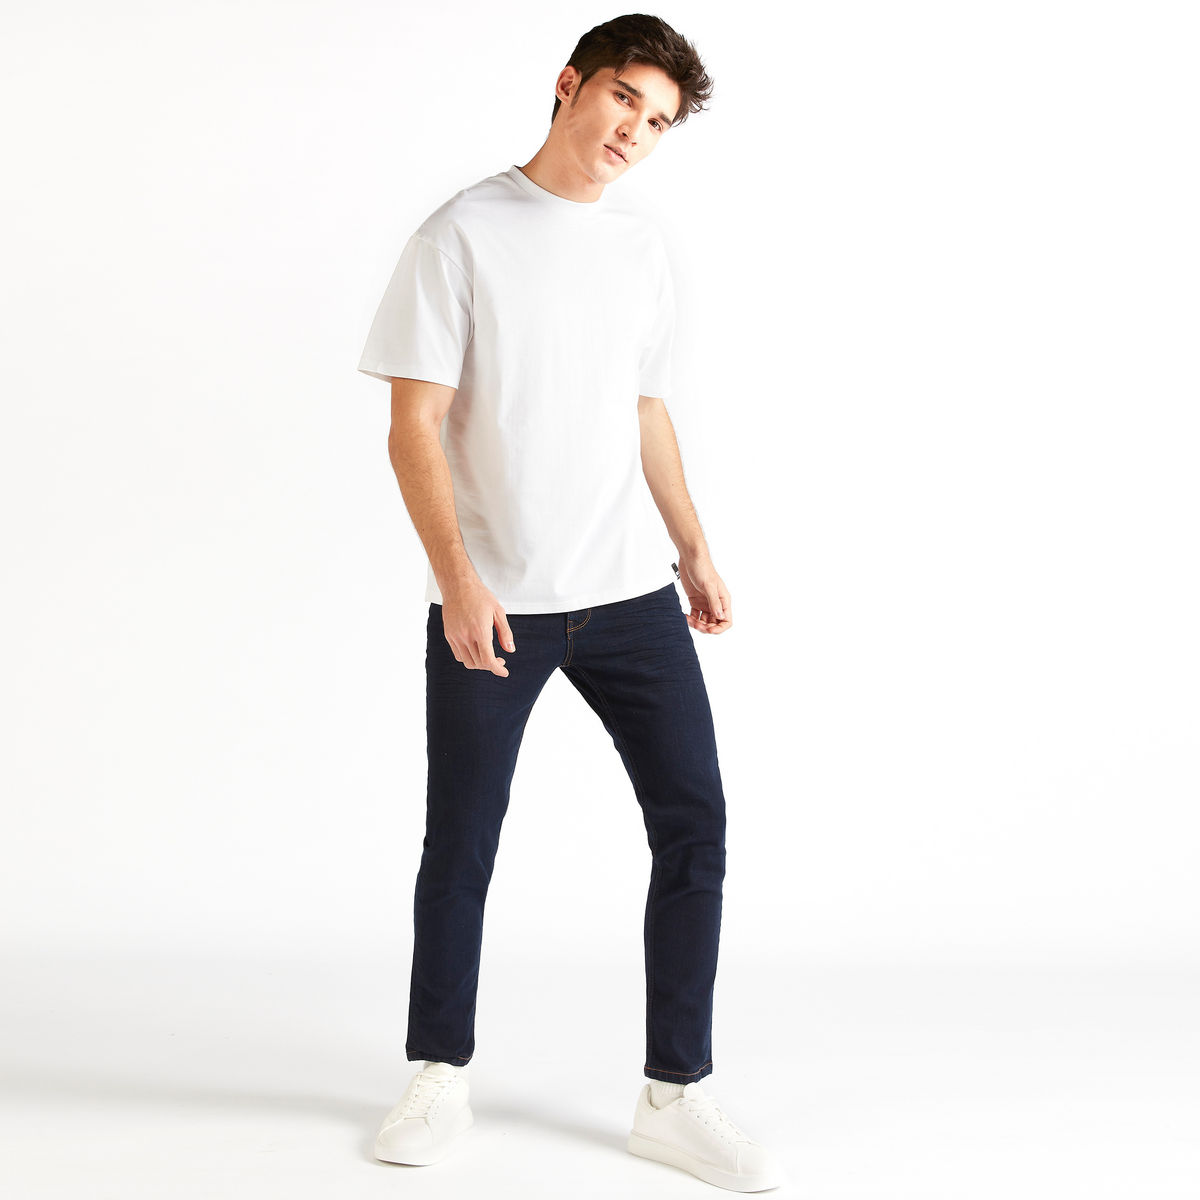 Buy Solid Denim Jeans with Button Closure and Pockets | Splash UAE